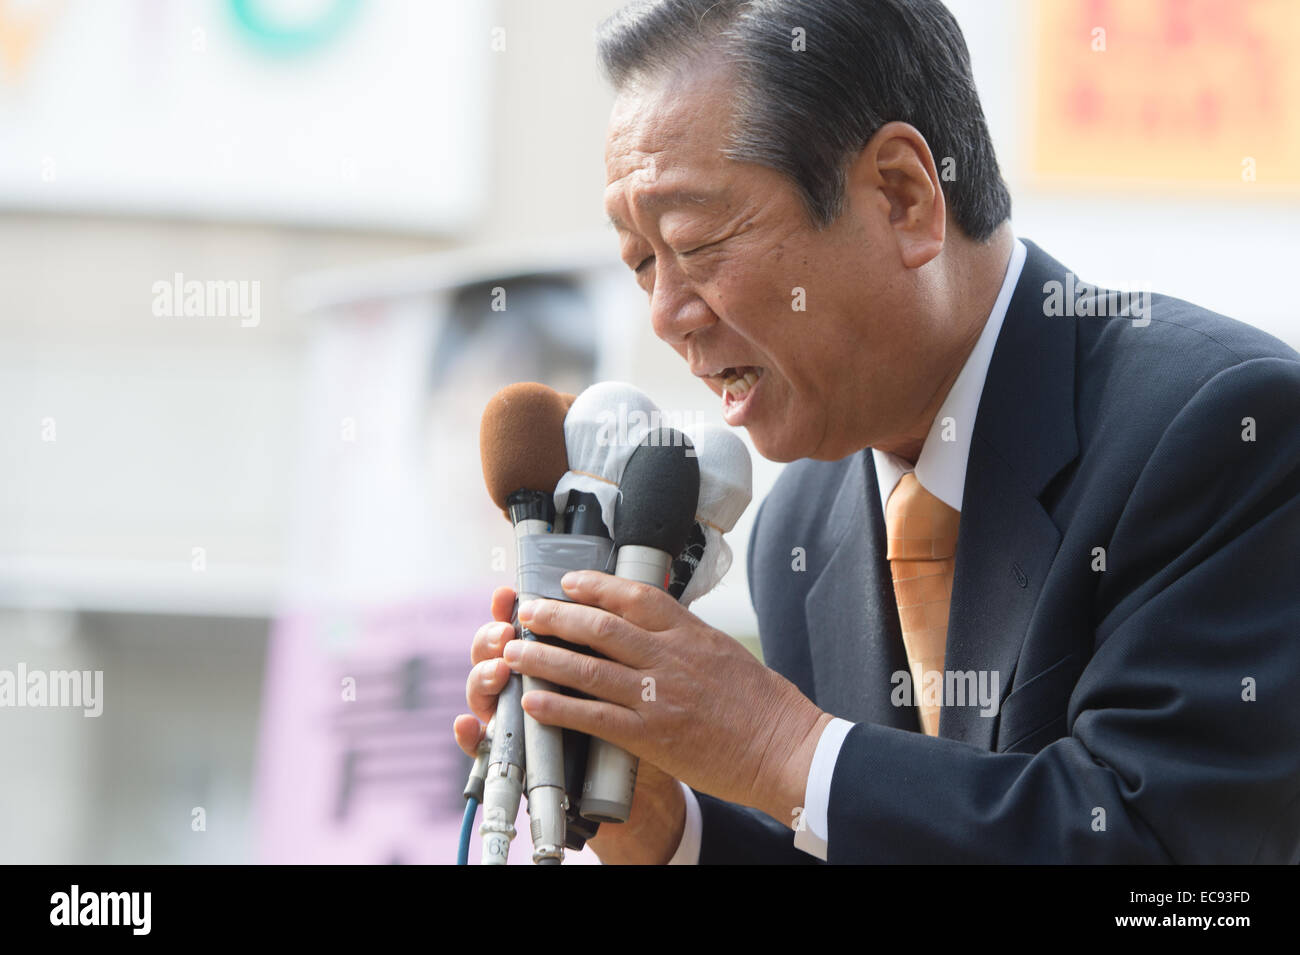 Tokyo, Japan. 10th Dec, 2014. Ichiro Ozawa, president of People's Life Party, delivers a speech to support their candidate, Ai Aoki during a campaign for the December 14 lower house election in Tokyo on December 10, 2014. © AFLO/Alamy Live News Stock Photo